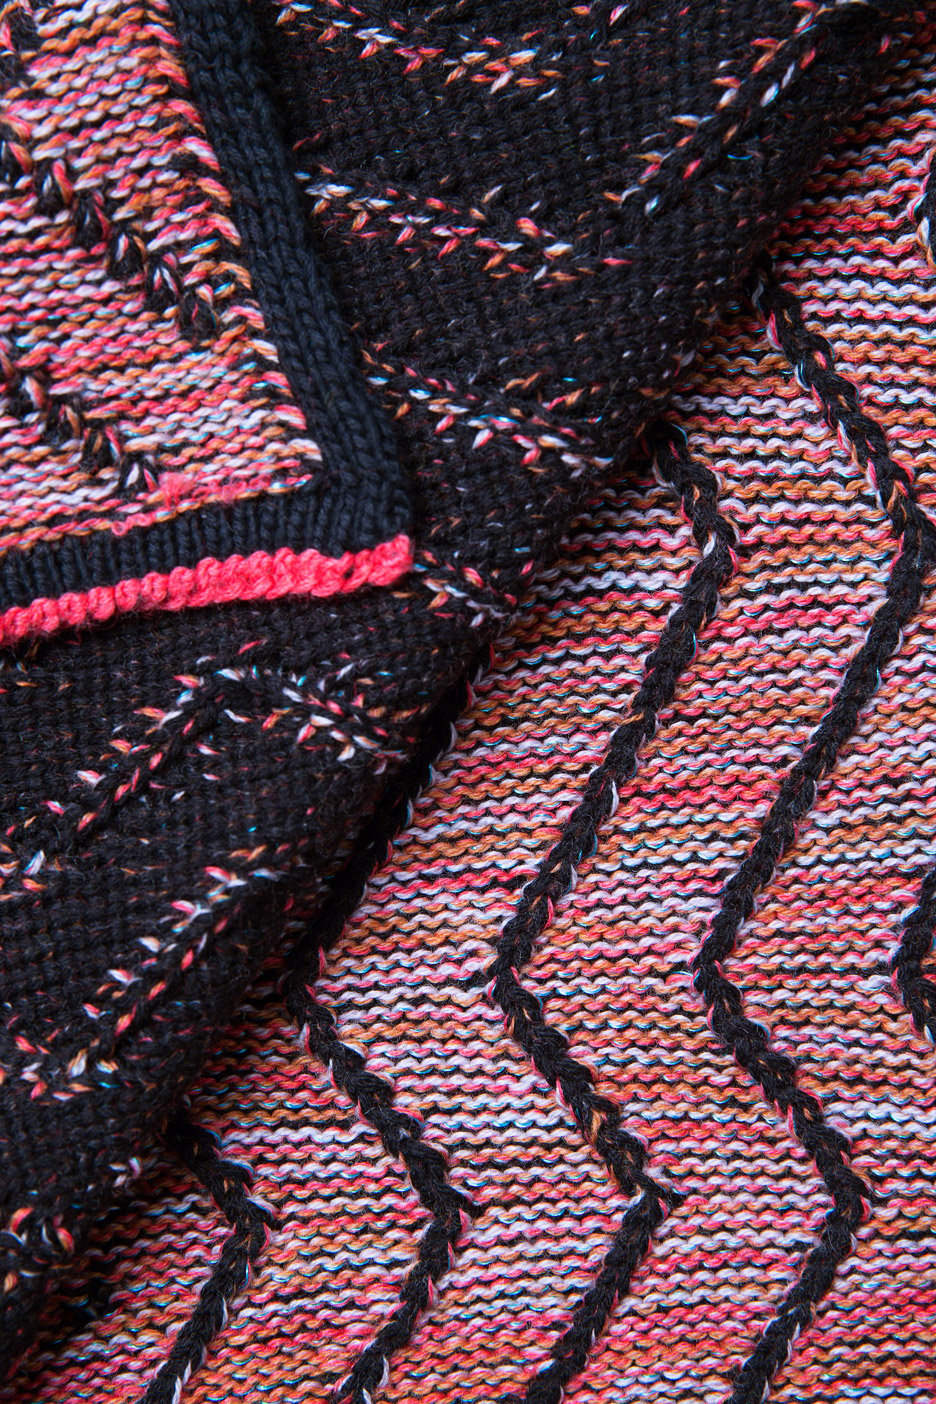 Plaid textile collection by Simone Post and Studio Truly Truly for TextielMuseum